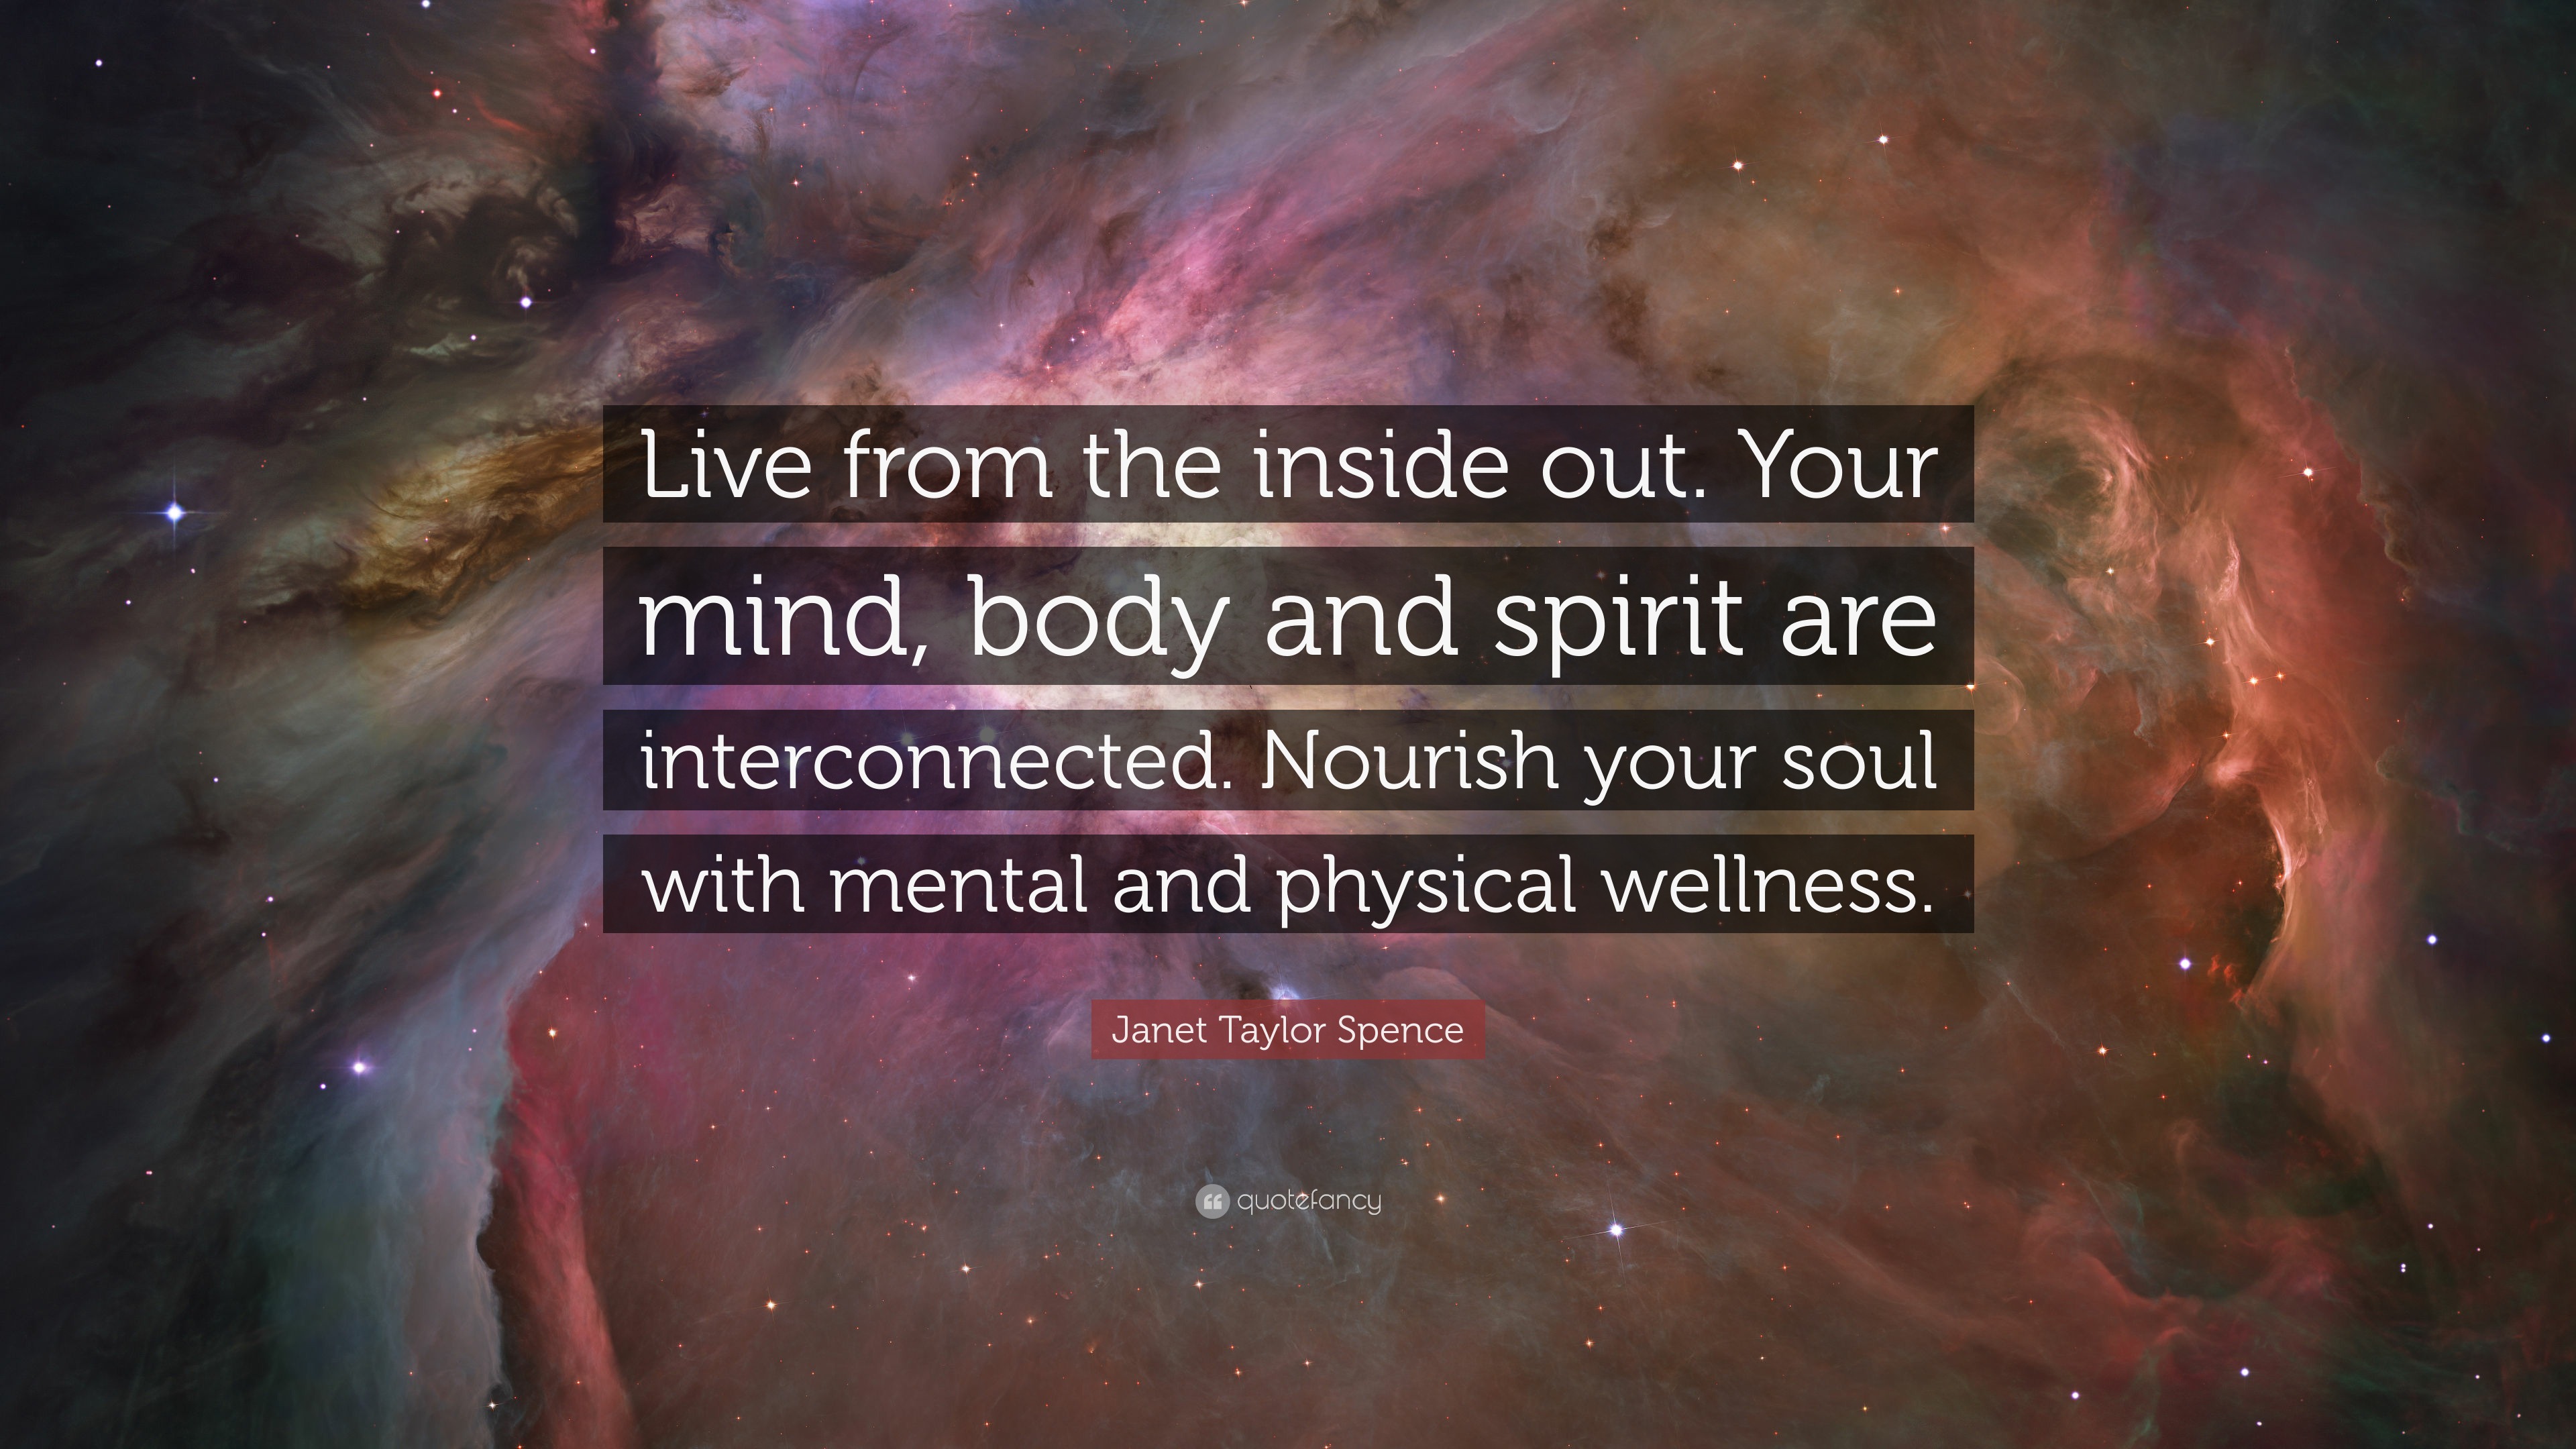 Janet Taylor Spence Quote Live From The Inside Out Your Mind Body And Spirit Are Interconnected Nourish Your Soul With Mental And Physical Well